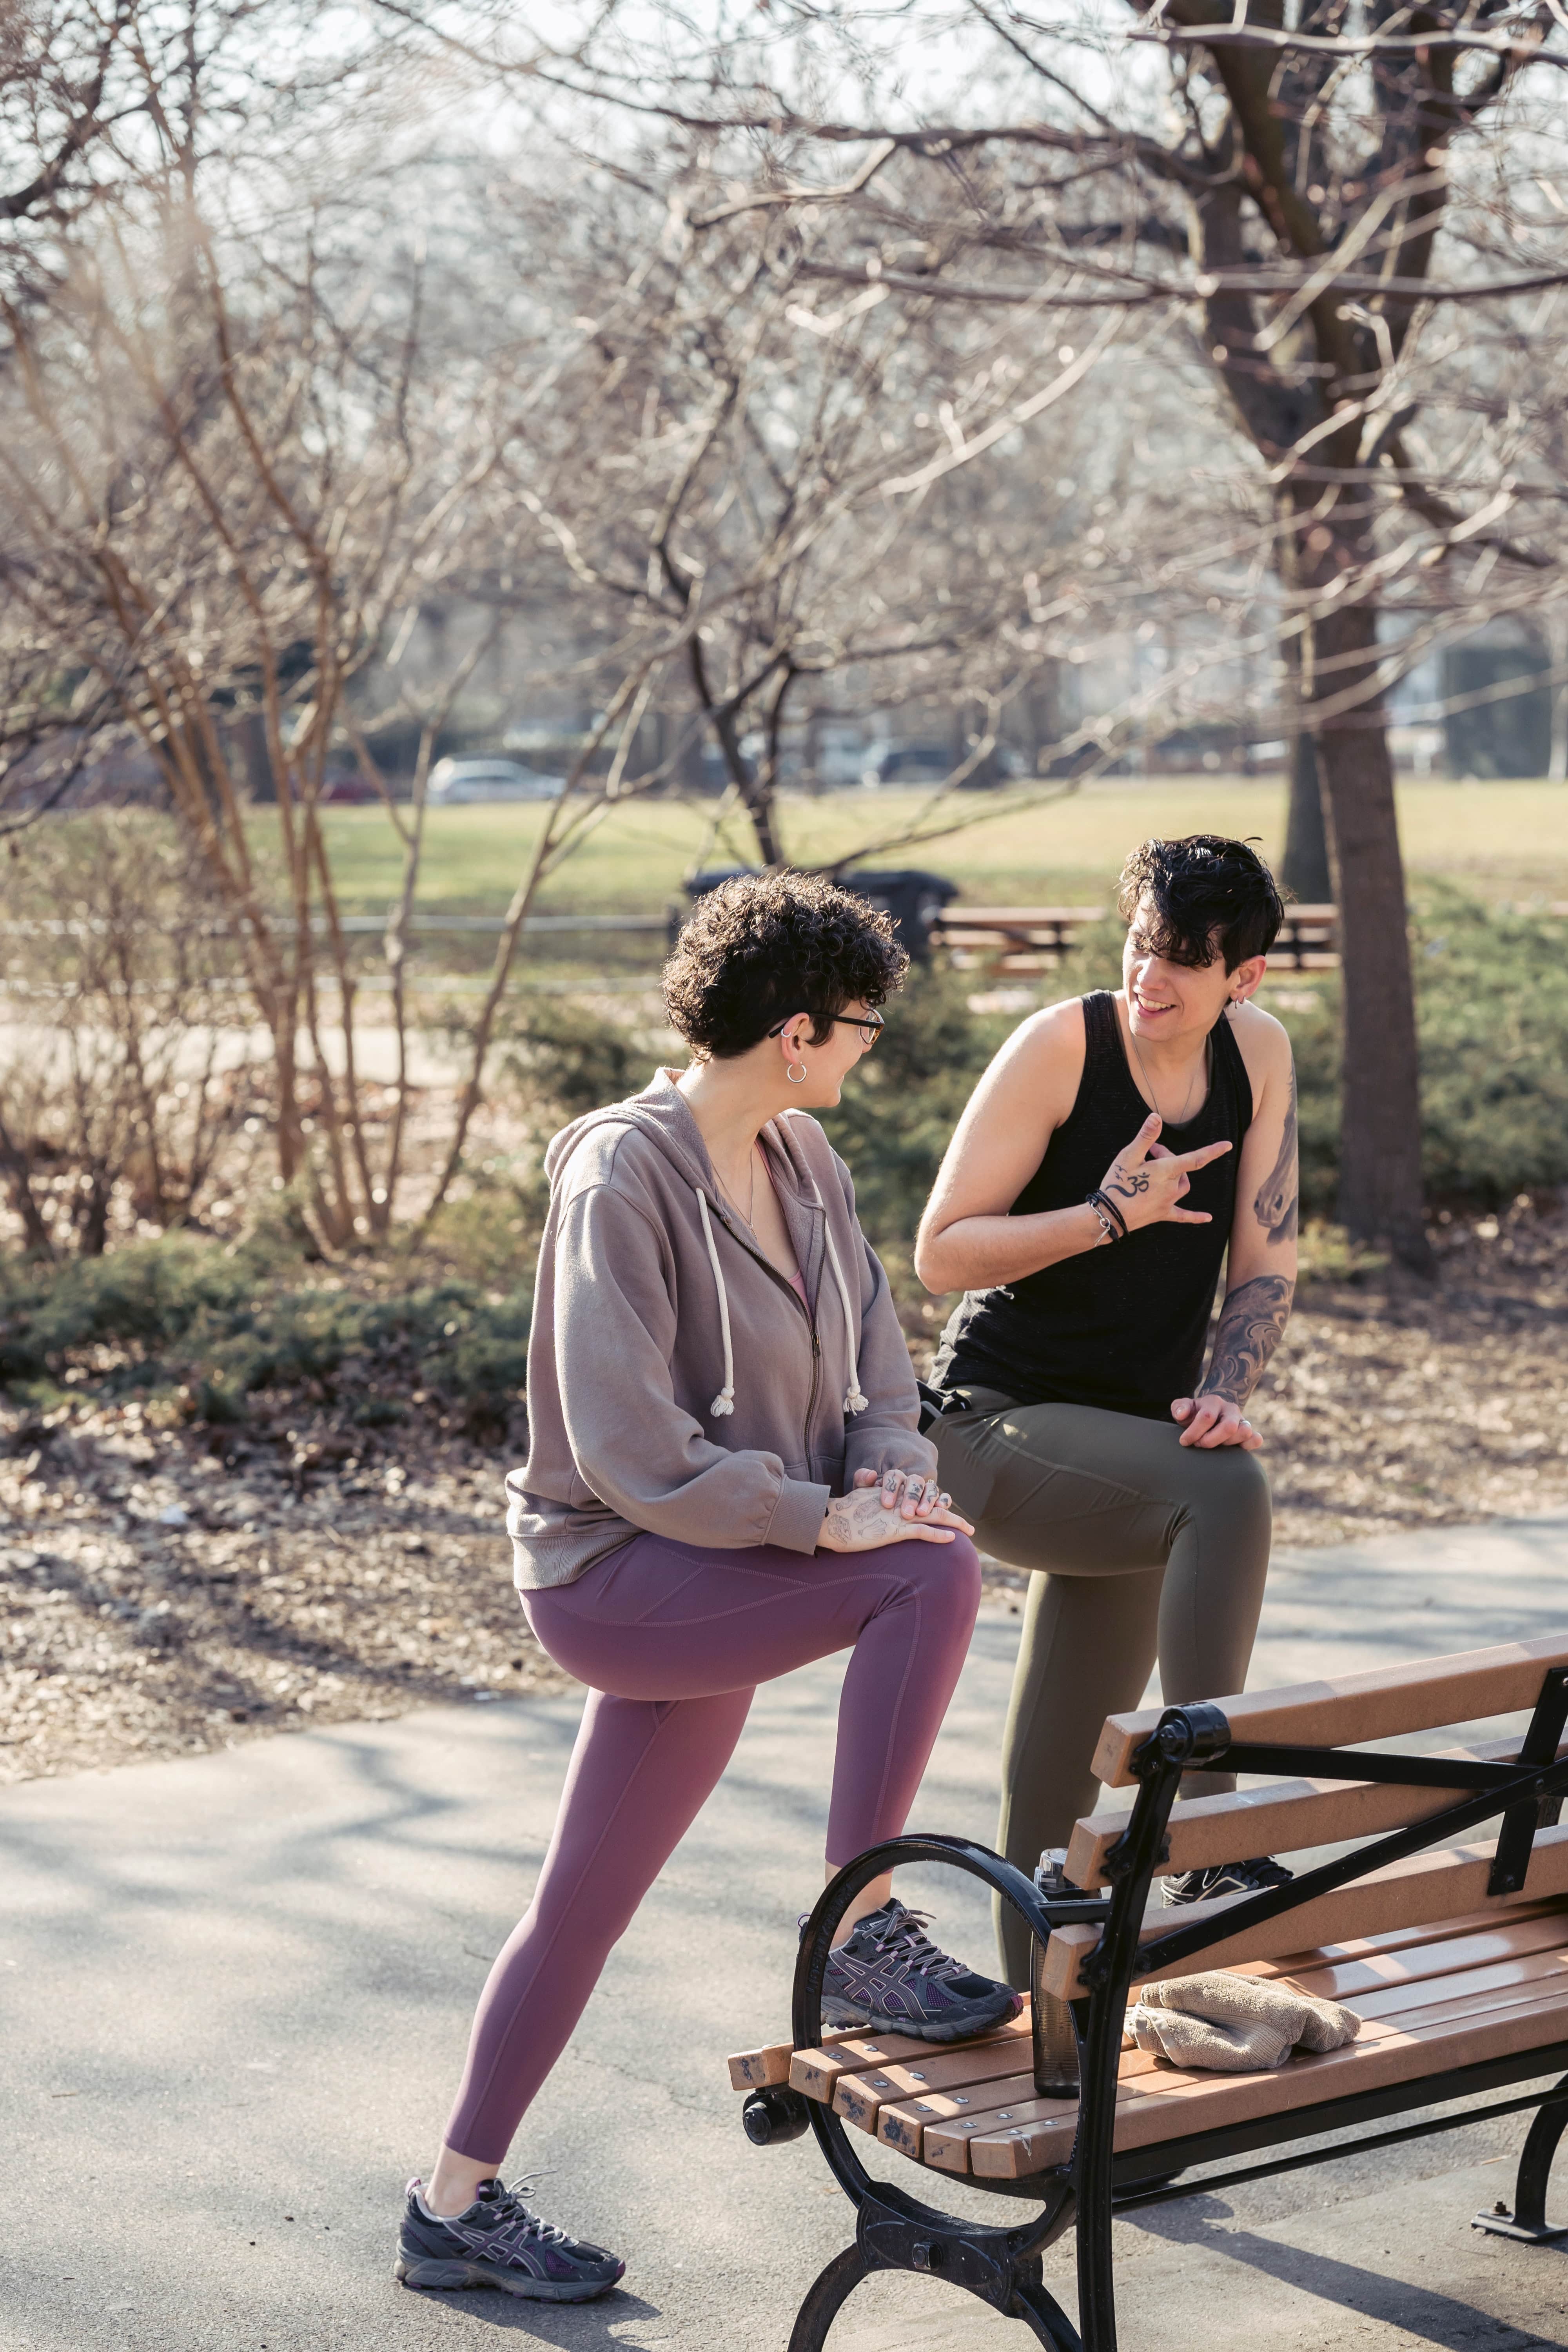 Two friends stretching together at a park bench as they prepare to go for a run